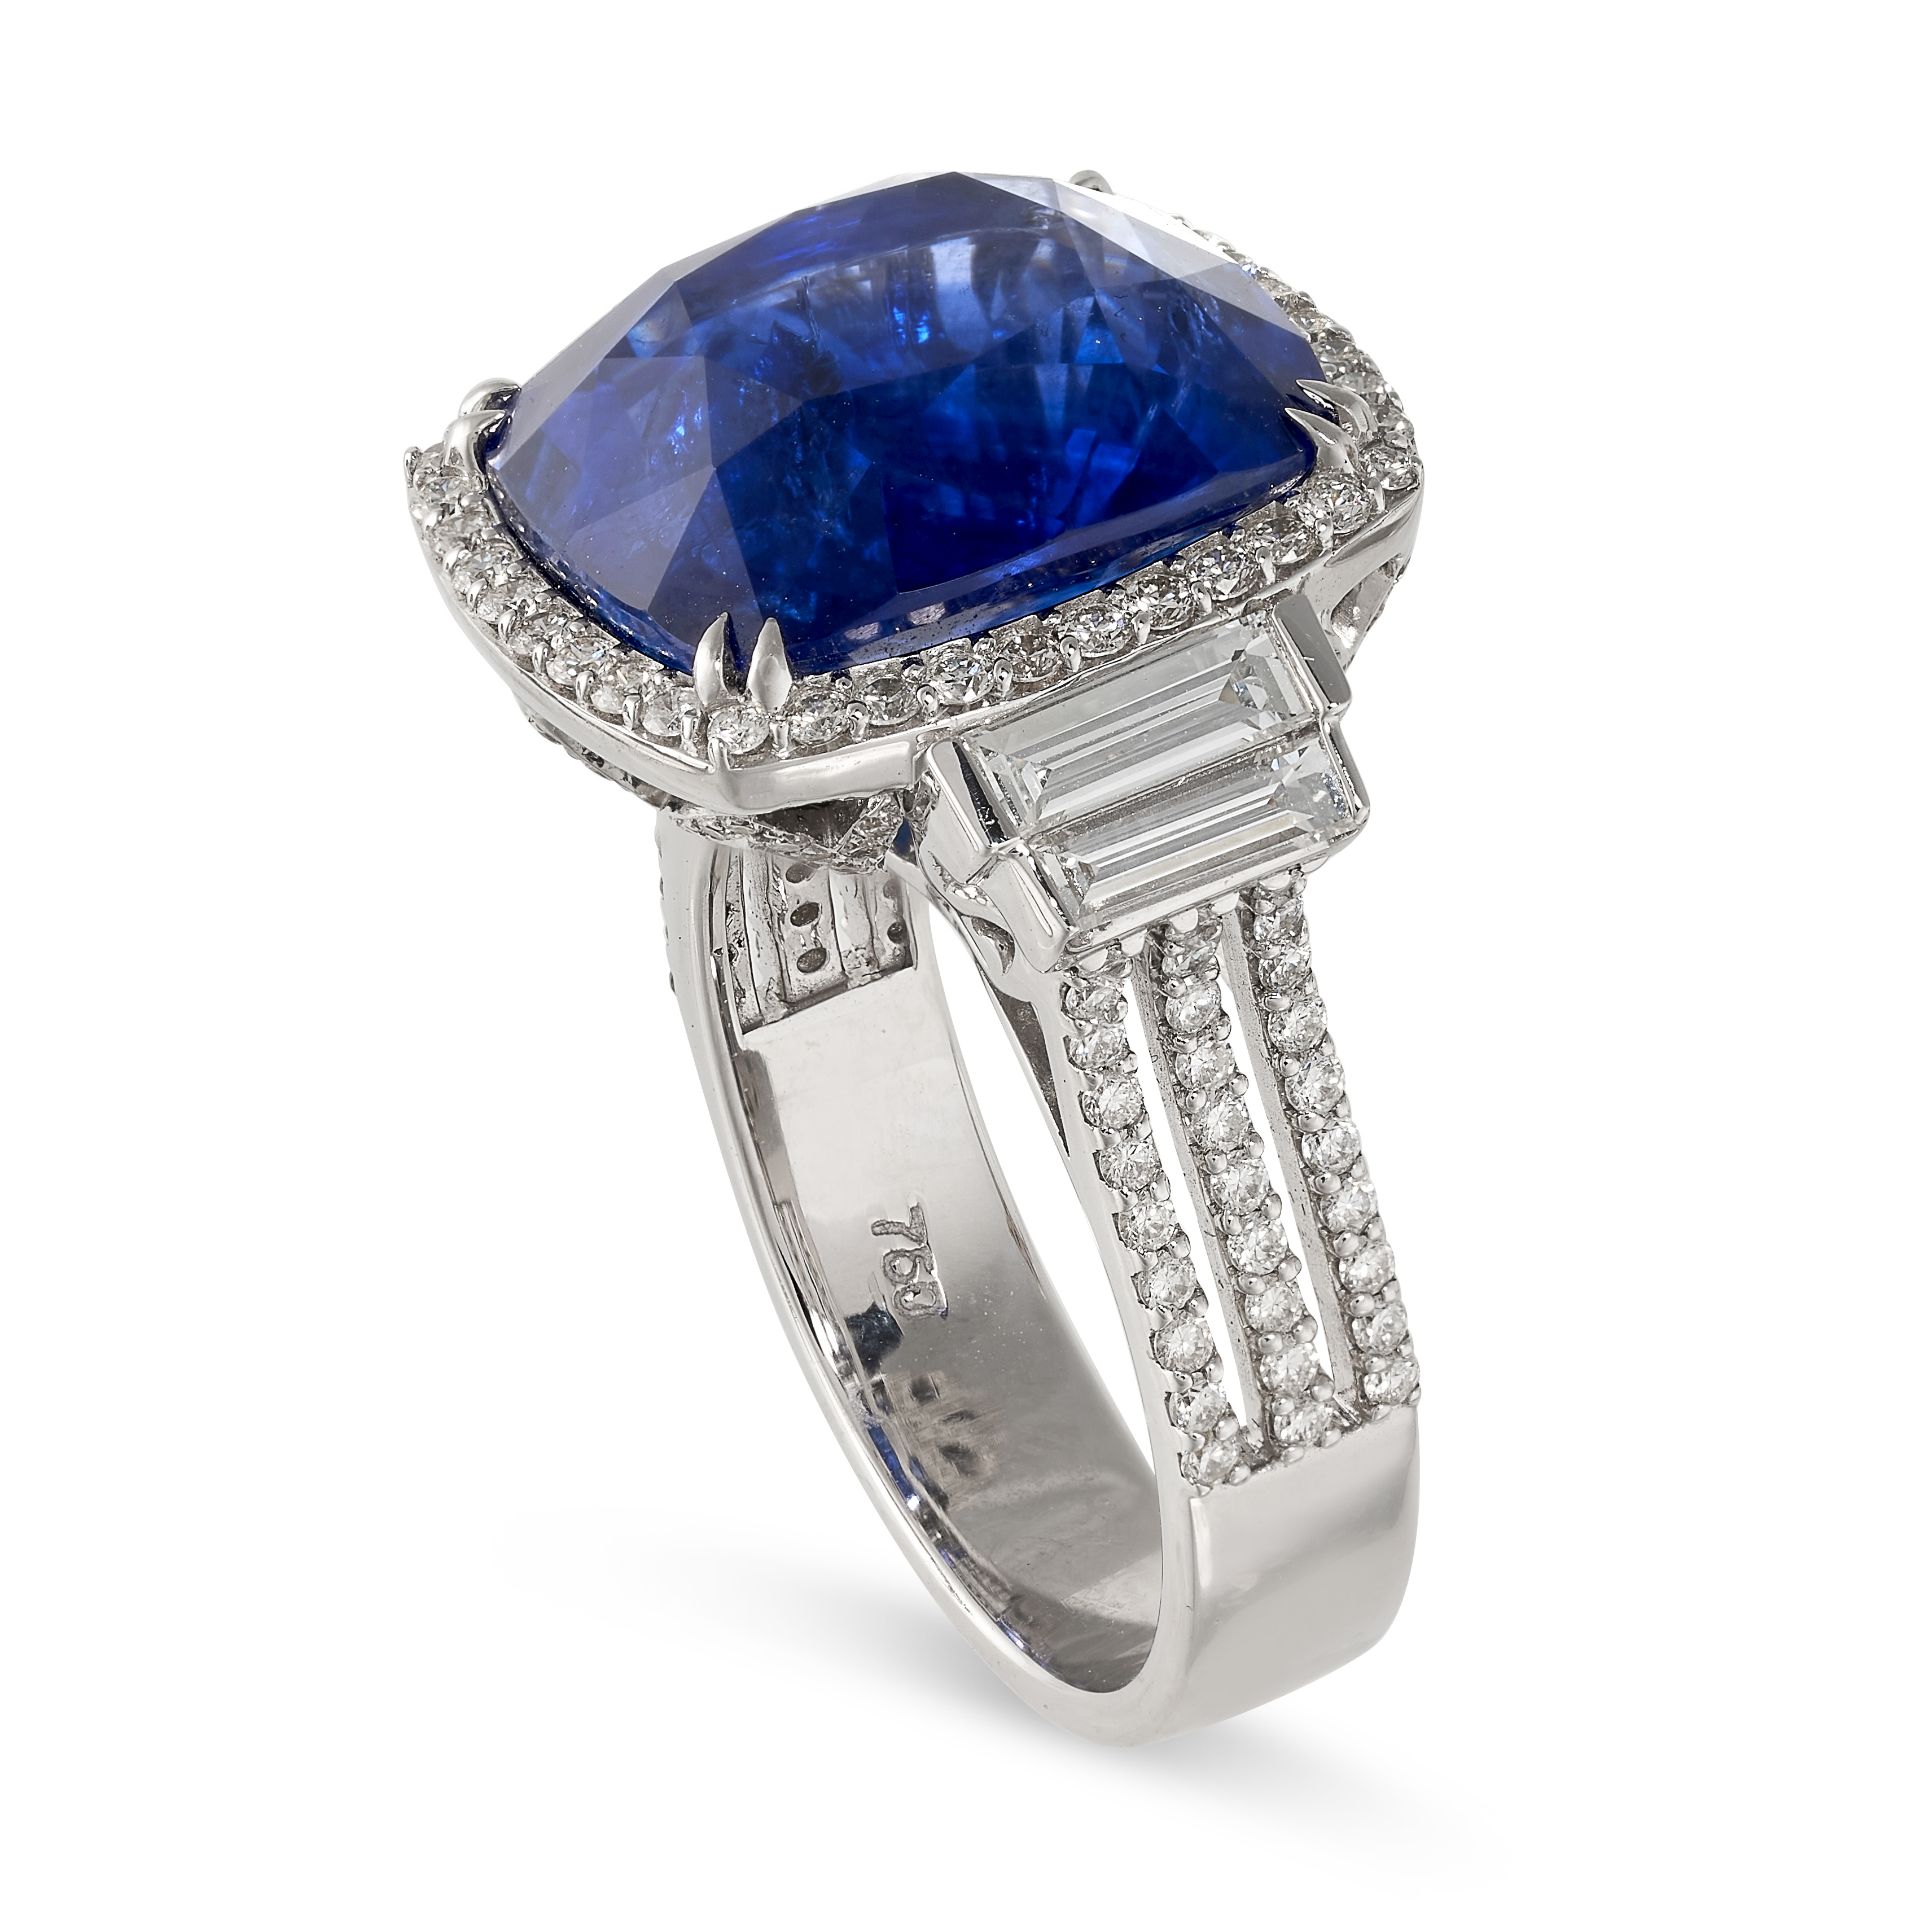 A LARGE SAPPHIRE AND DIAMOND RING in 18ct white gold, set with a cushion cut blue sapphire of 14. - Image 2 of 2